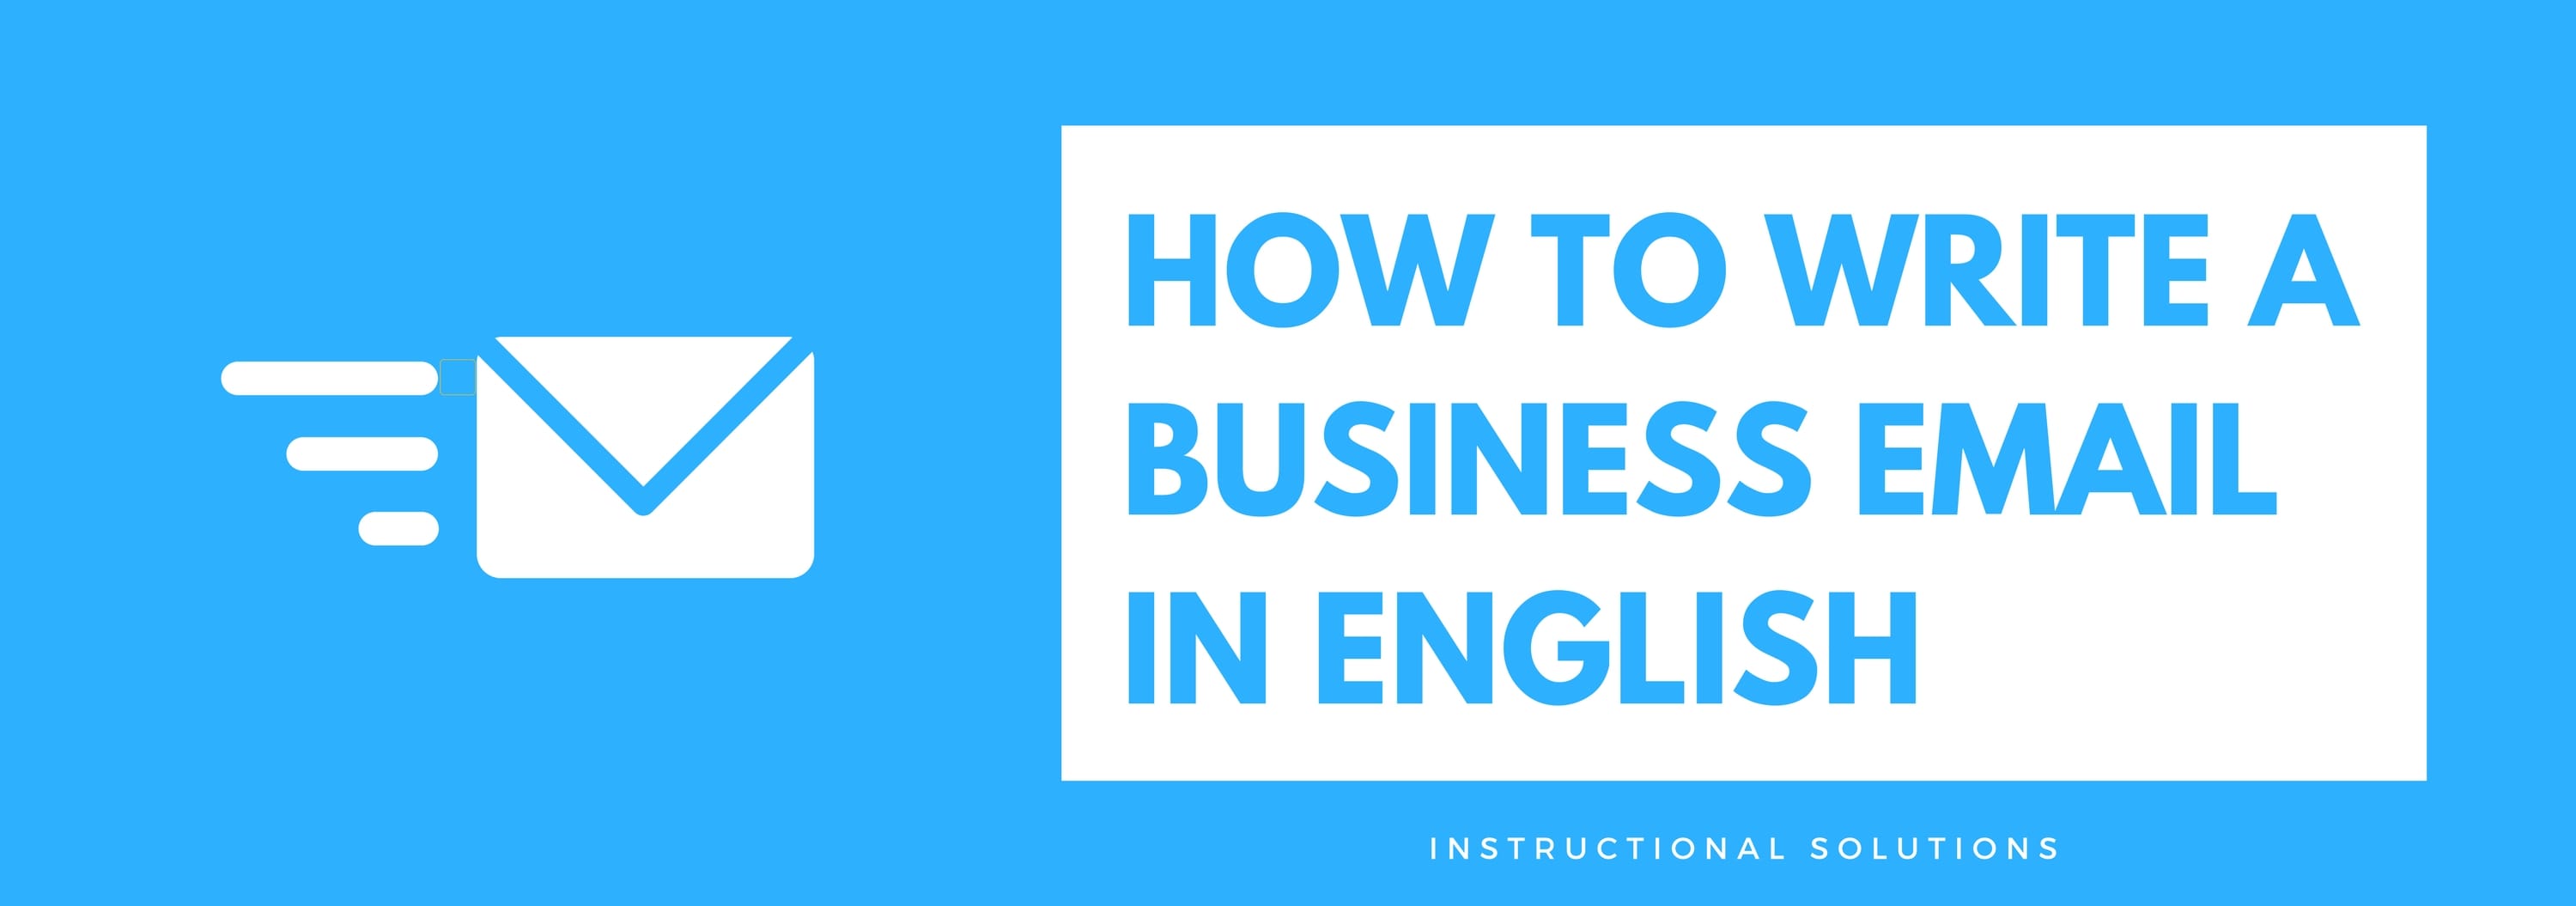 Tips on How to Write a Professional Email in English